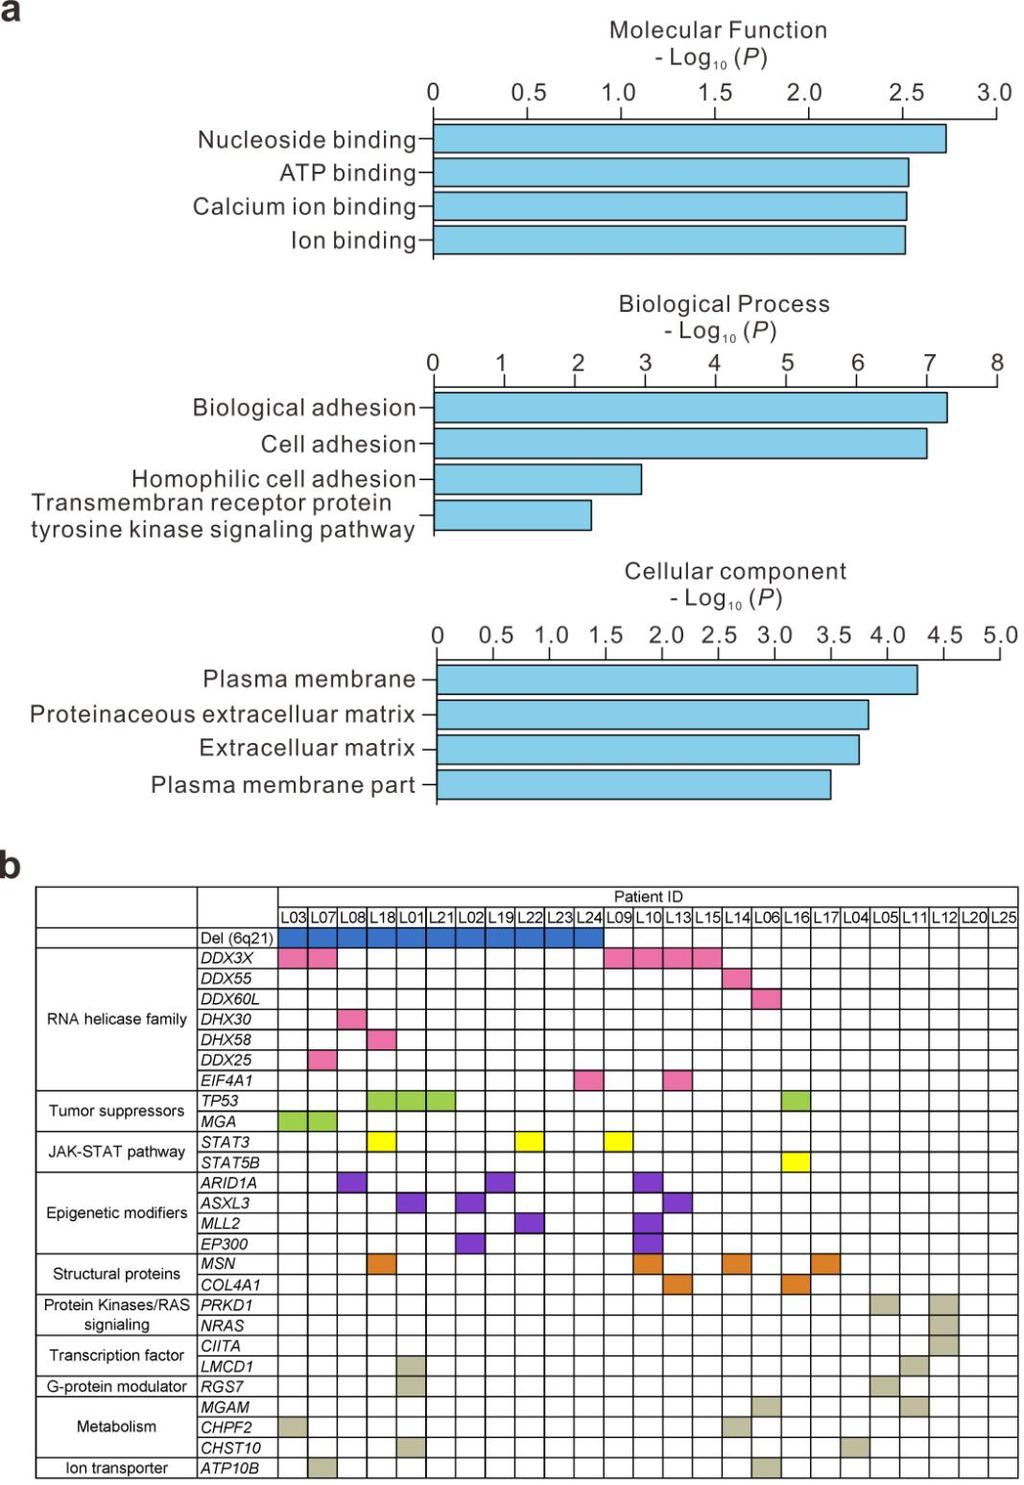 Supplementary Figure 4 Functional categories of somatic mutations in 25 people with NKTCL, subjected to whole-exome sequencing.